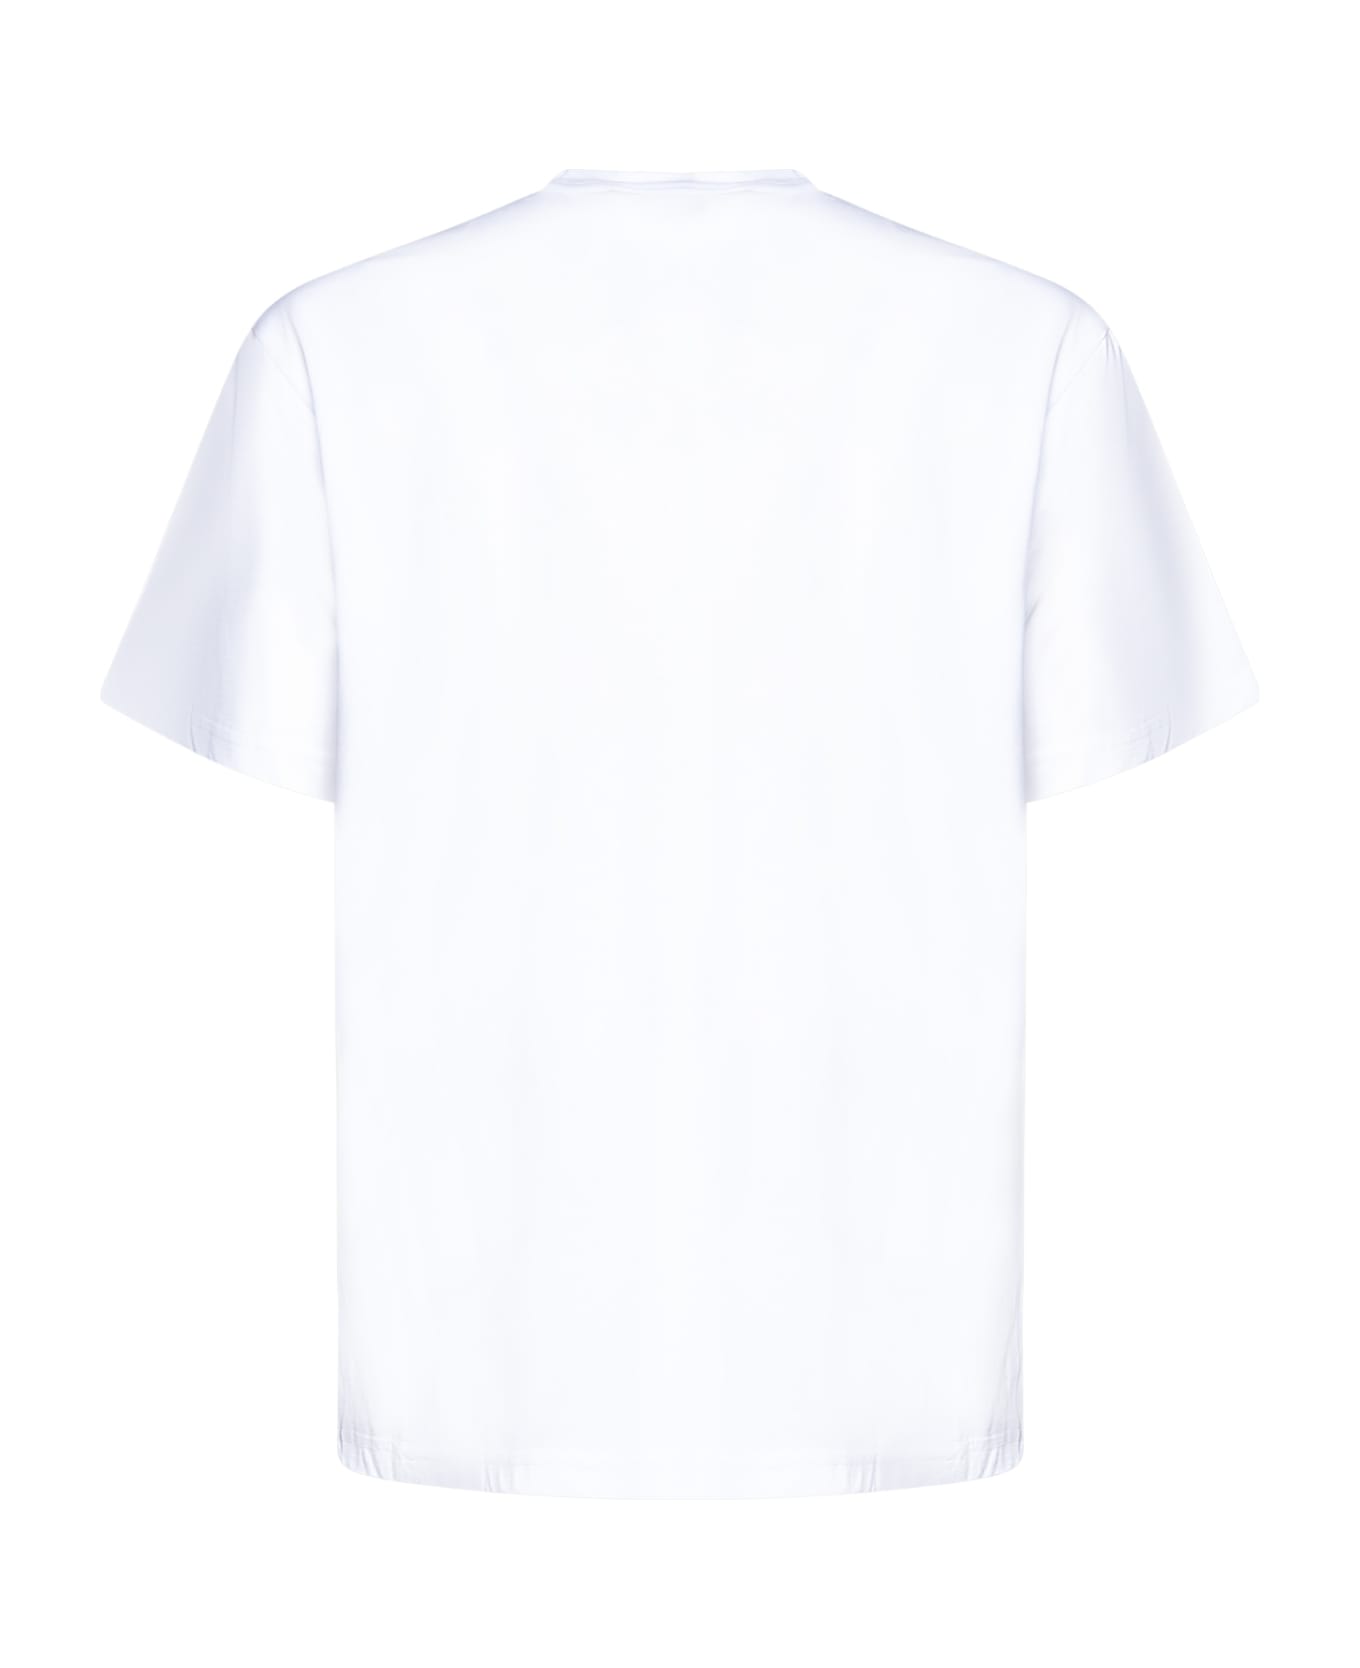 Versace Jeans Couture T-Shirt - White gold